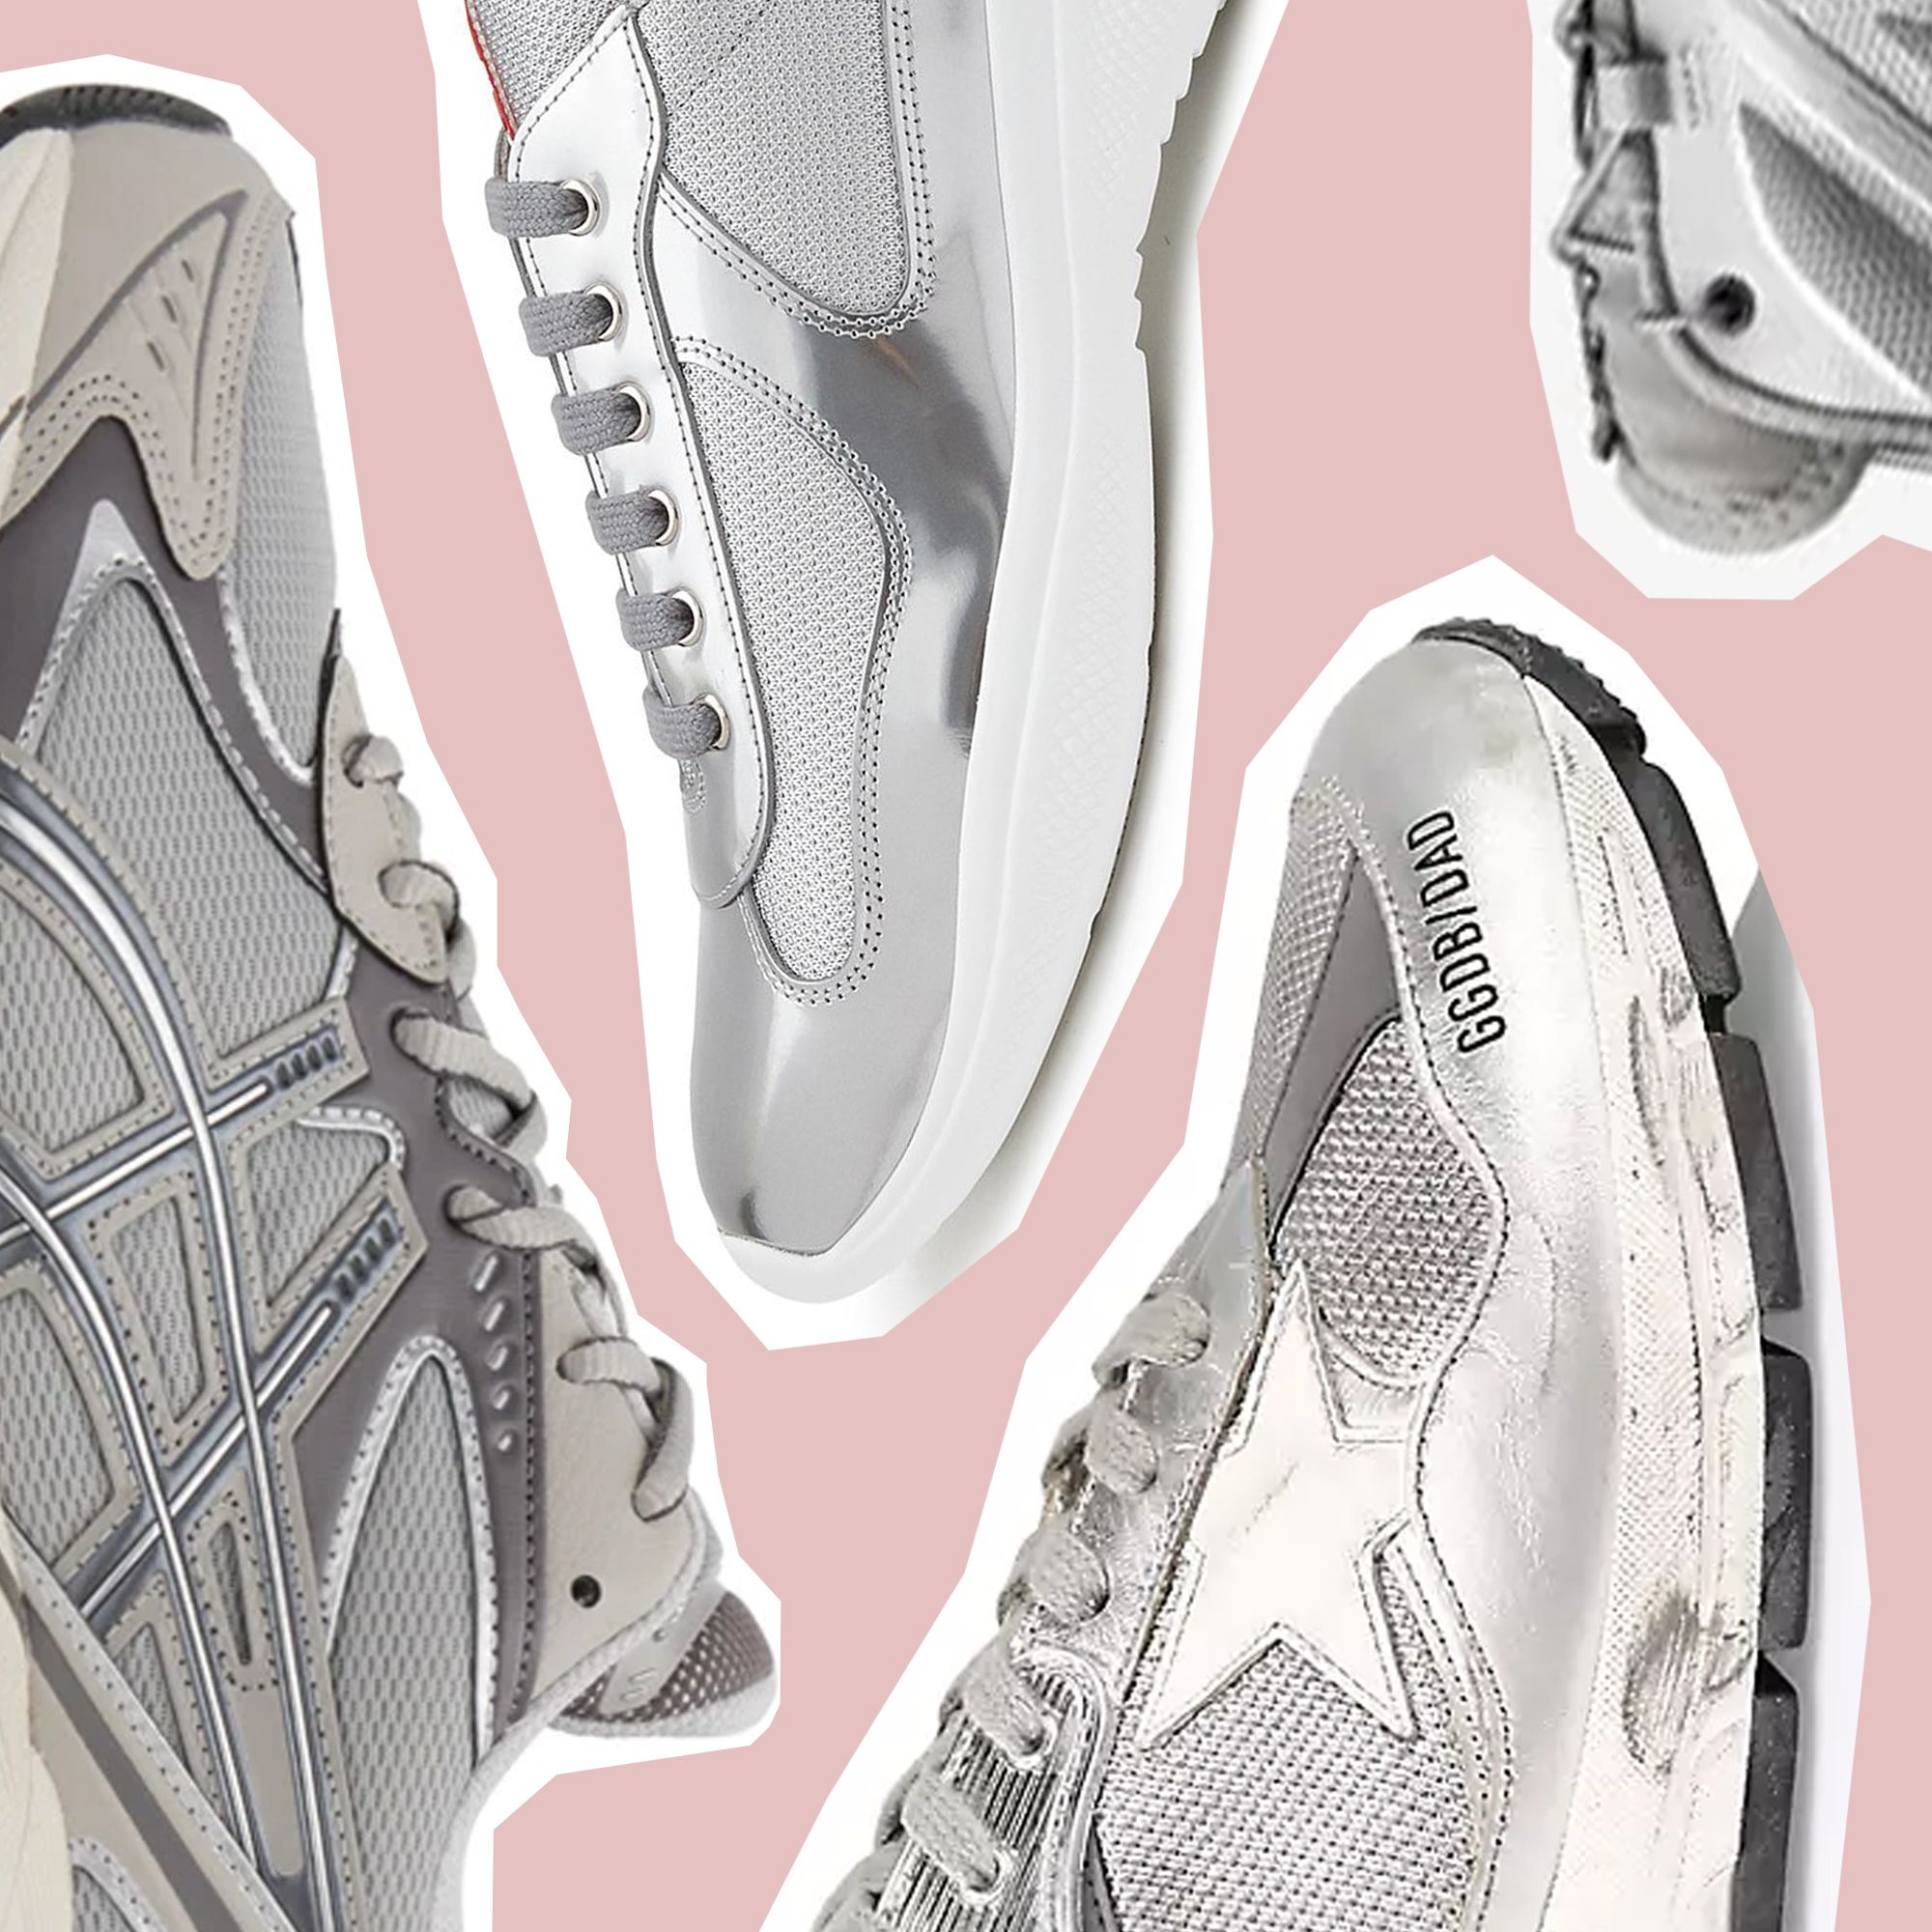 The Shiny, Silvery Retro Runner Is Back From the 2000s—and Better Than Ever